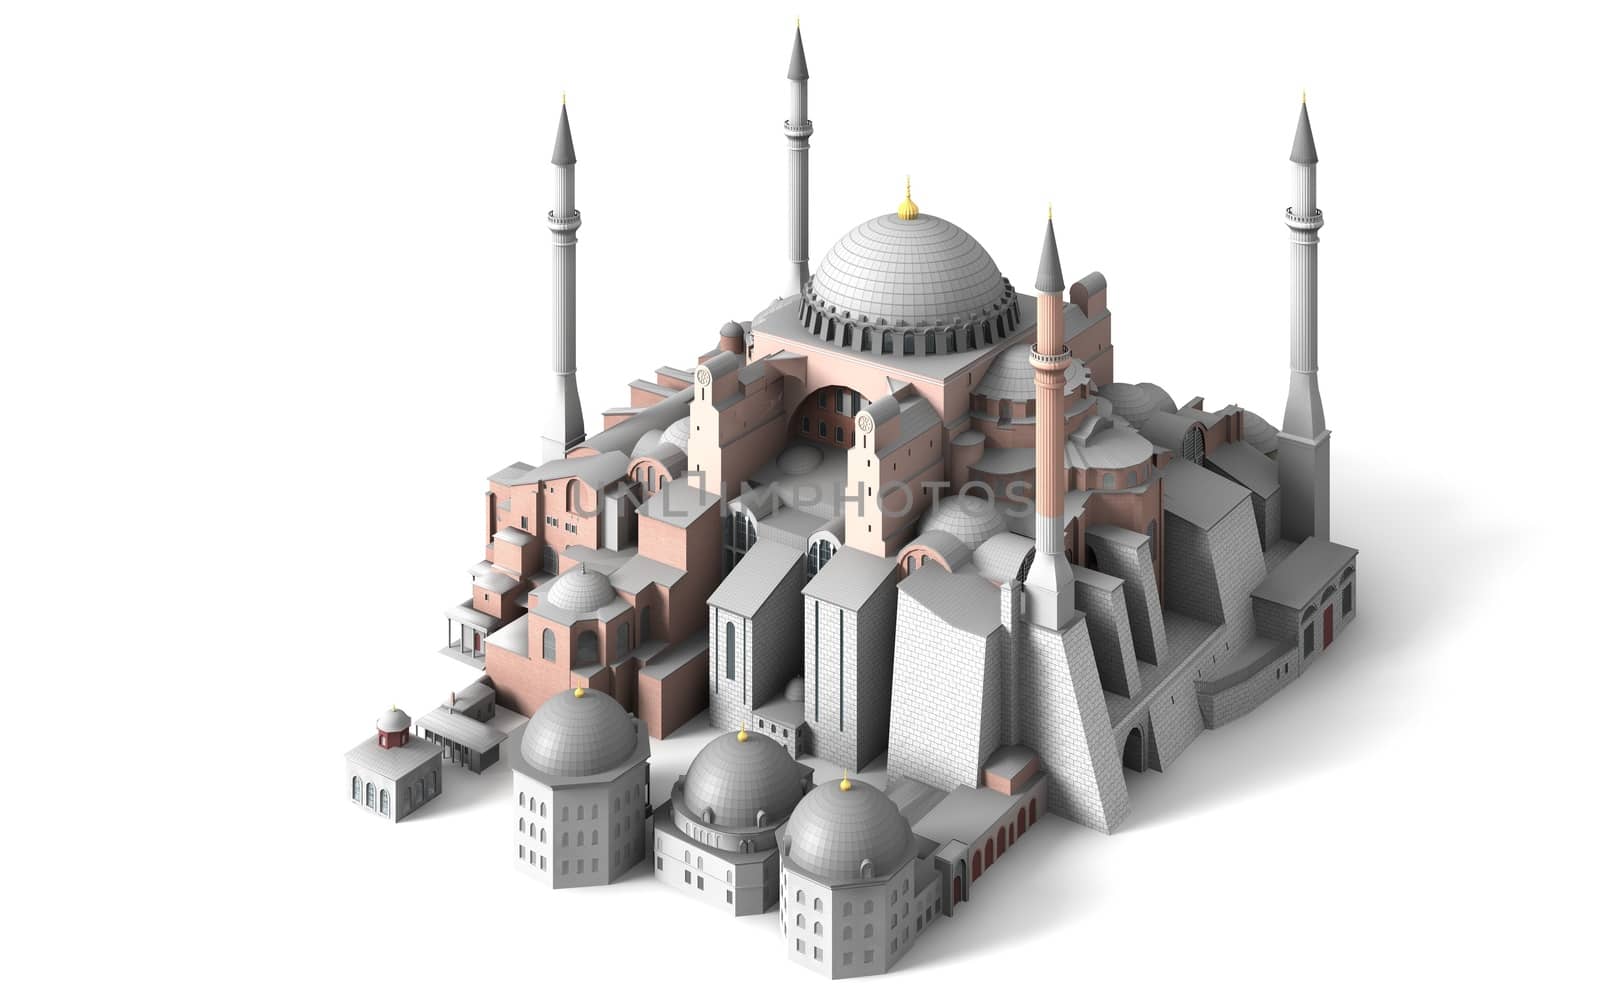 The Hagia Sophia is one of the most outstanding monuments of late antiquity.